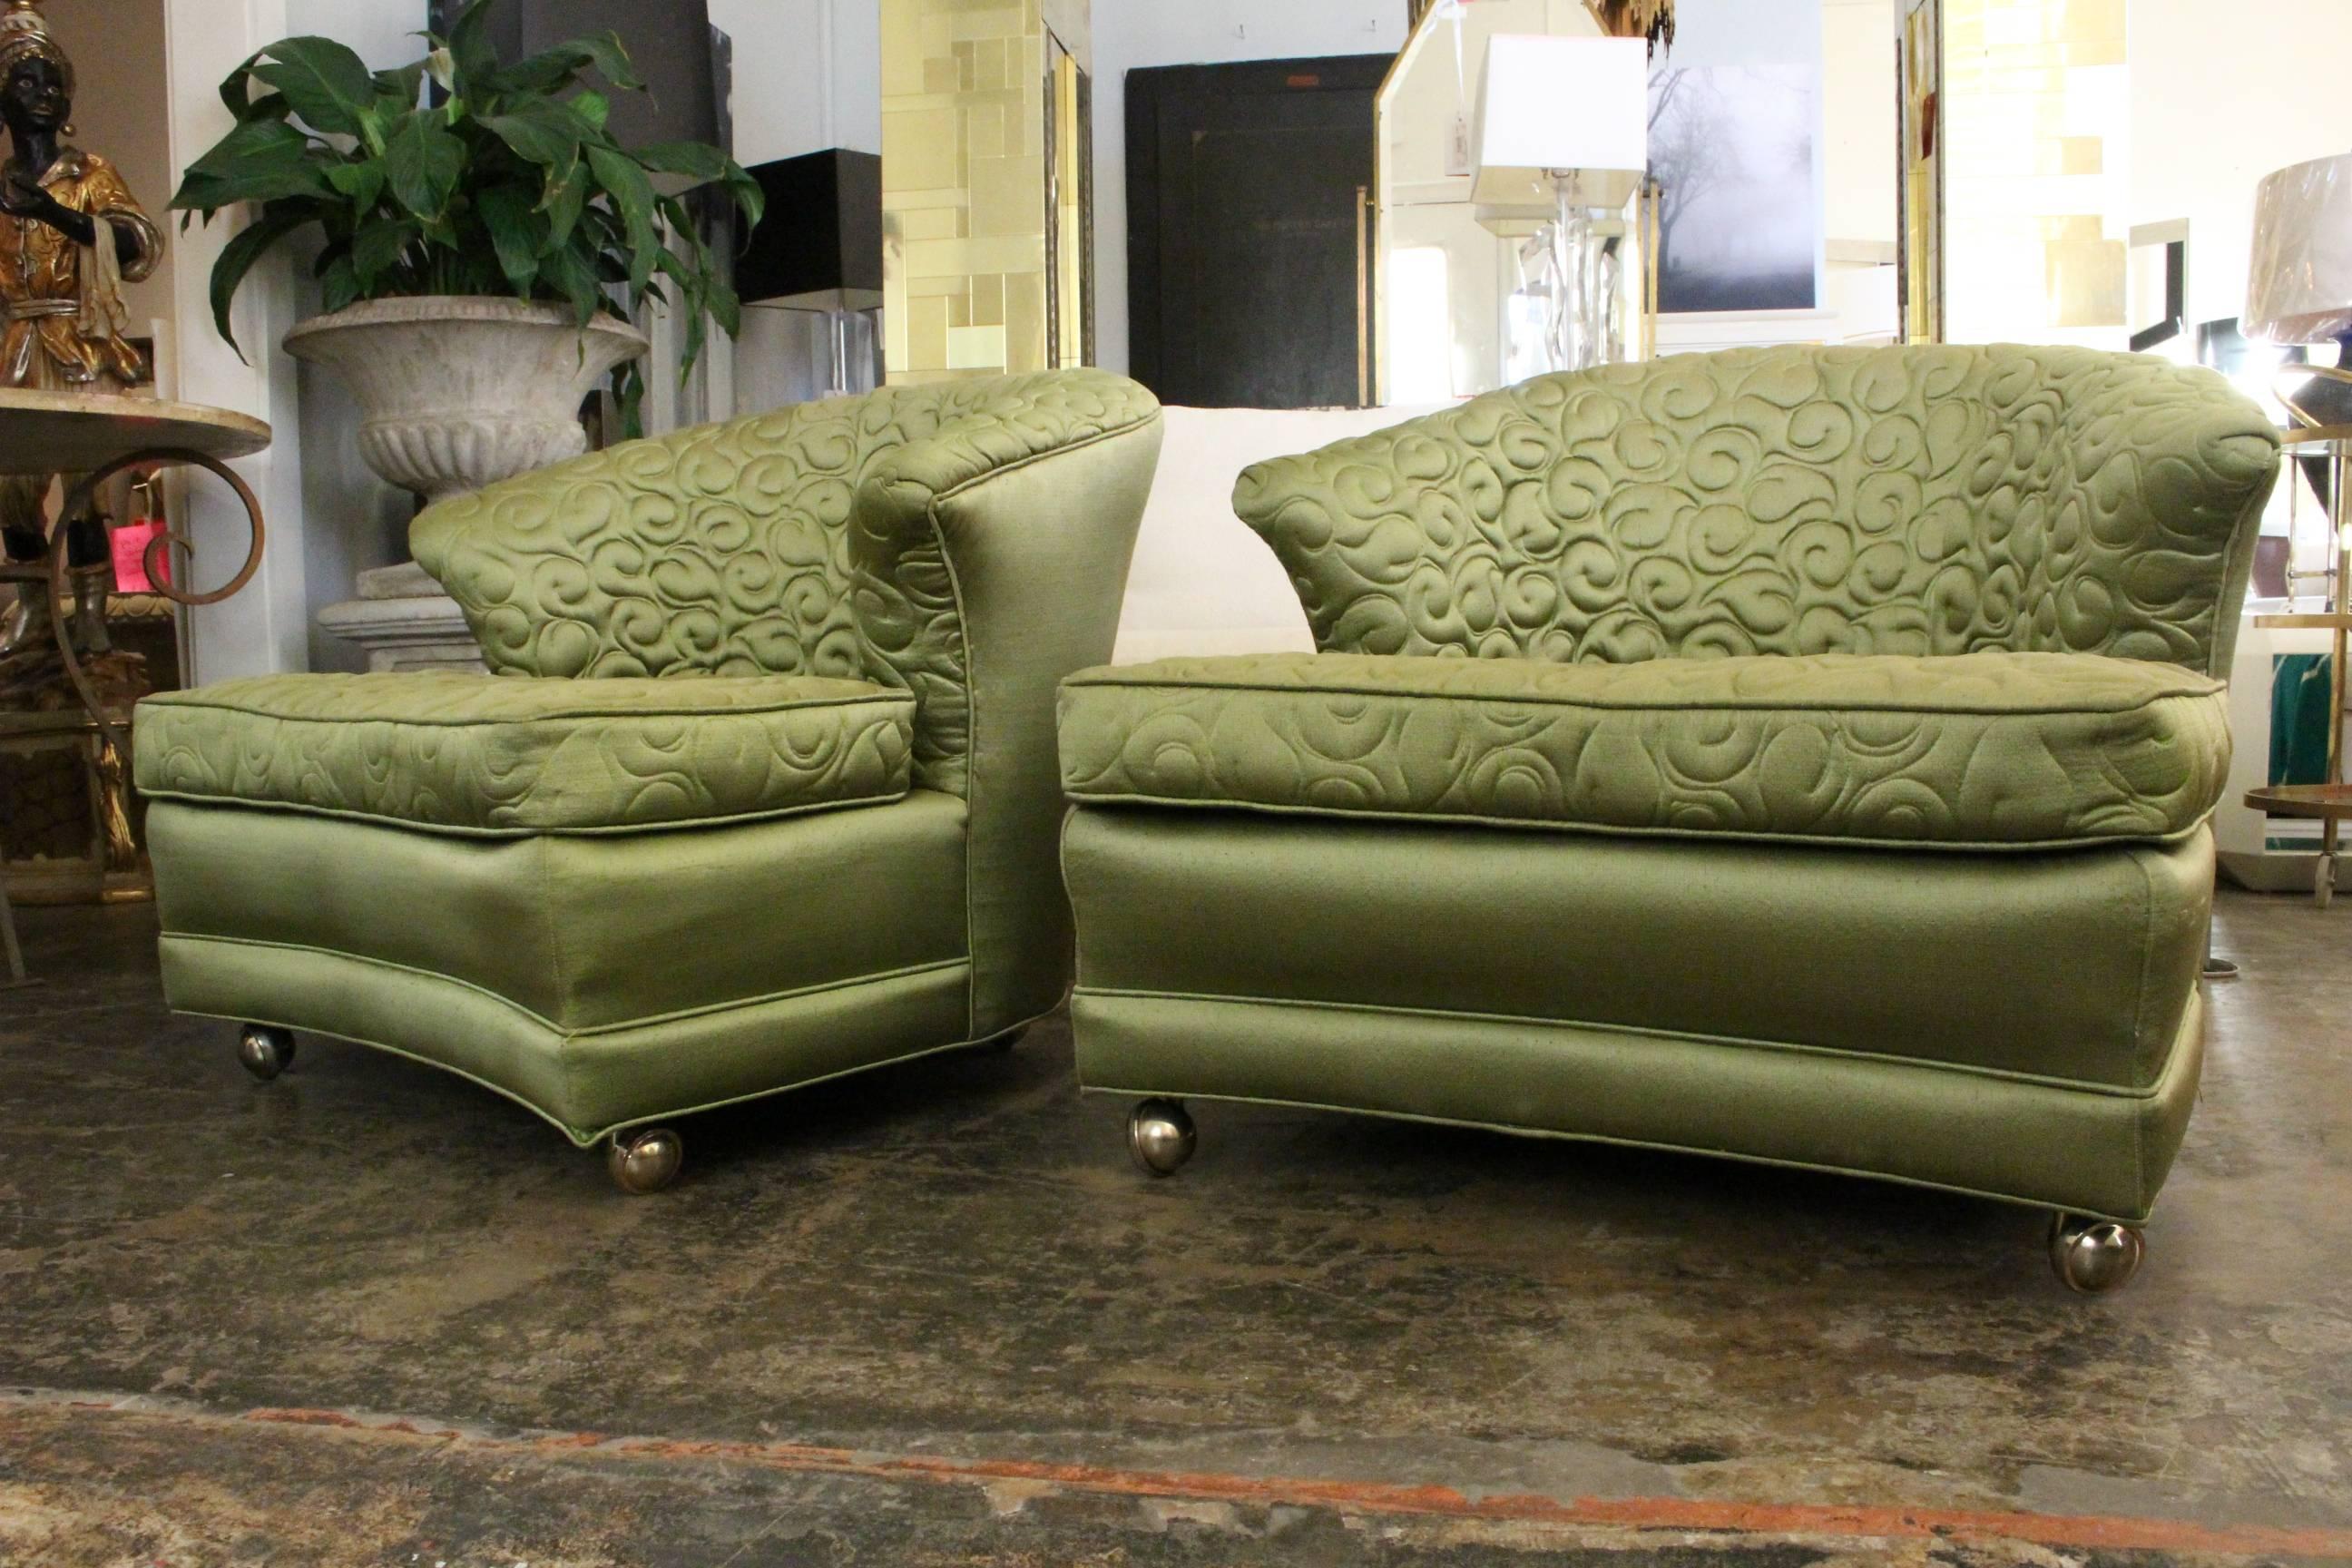 Pair Regency slipper lounge chairs.

Dimensions: 34" W x 33" D x 28" T.
Seat height 16".